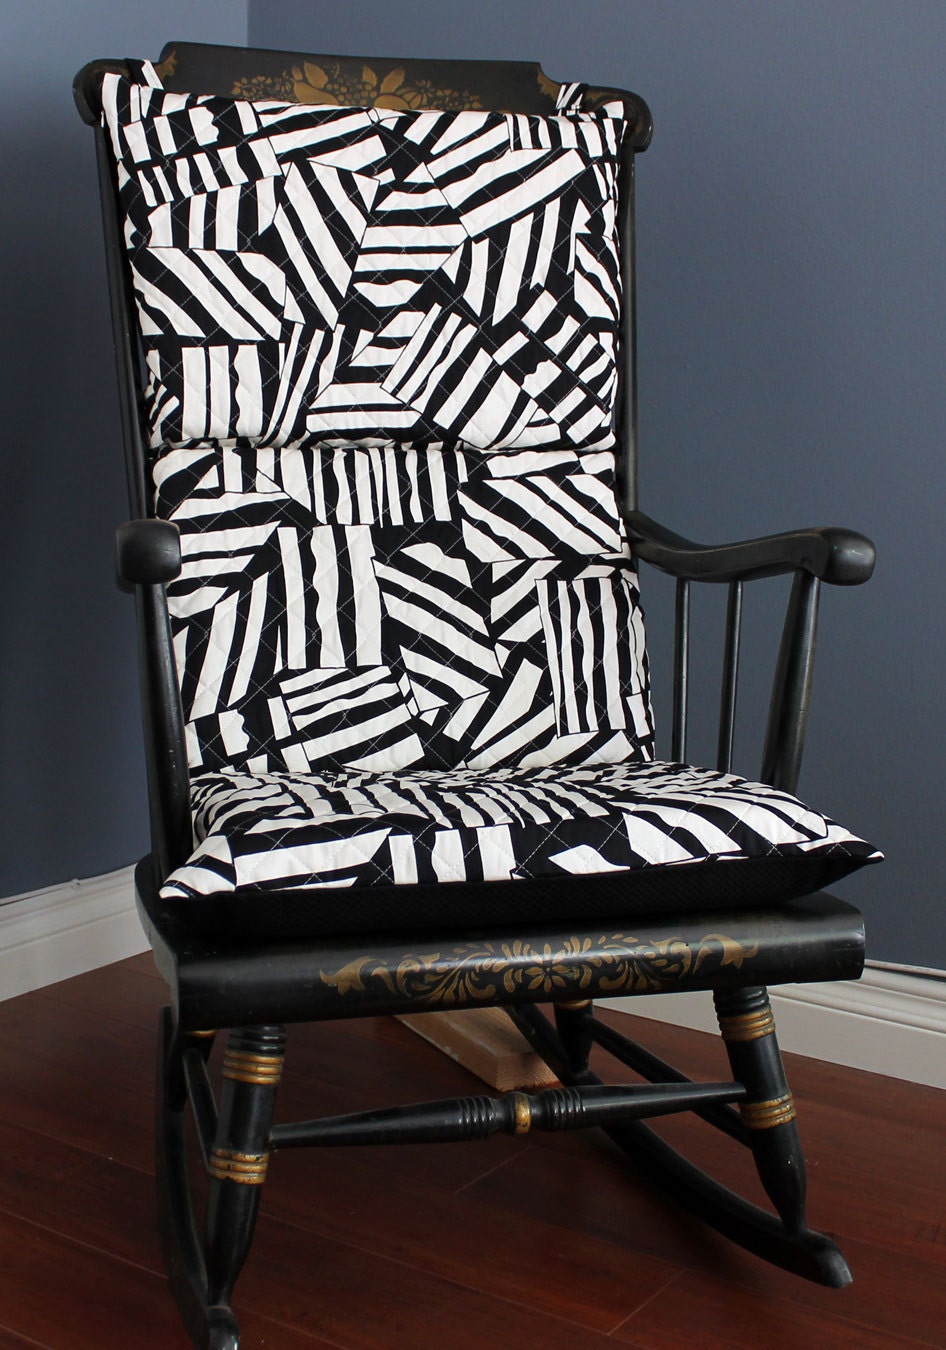 ON SALE Rocking Chair Cushion Quilted Black White